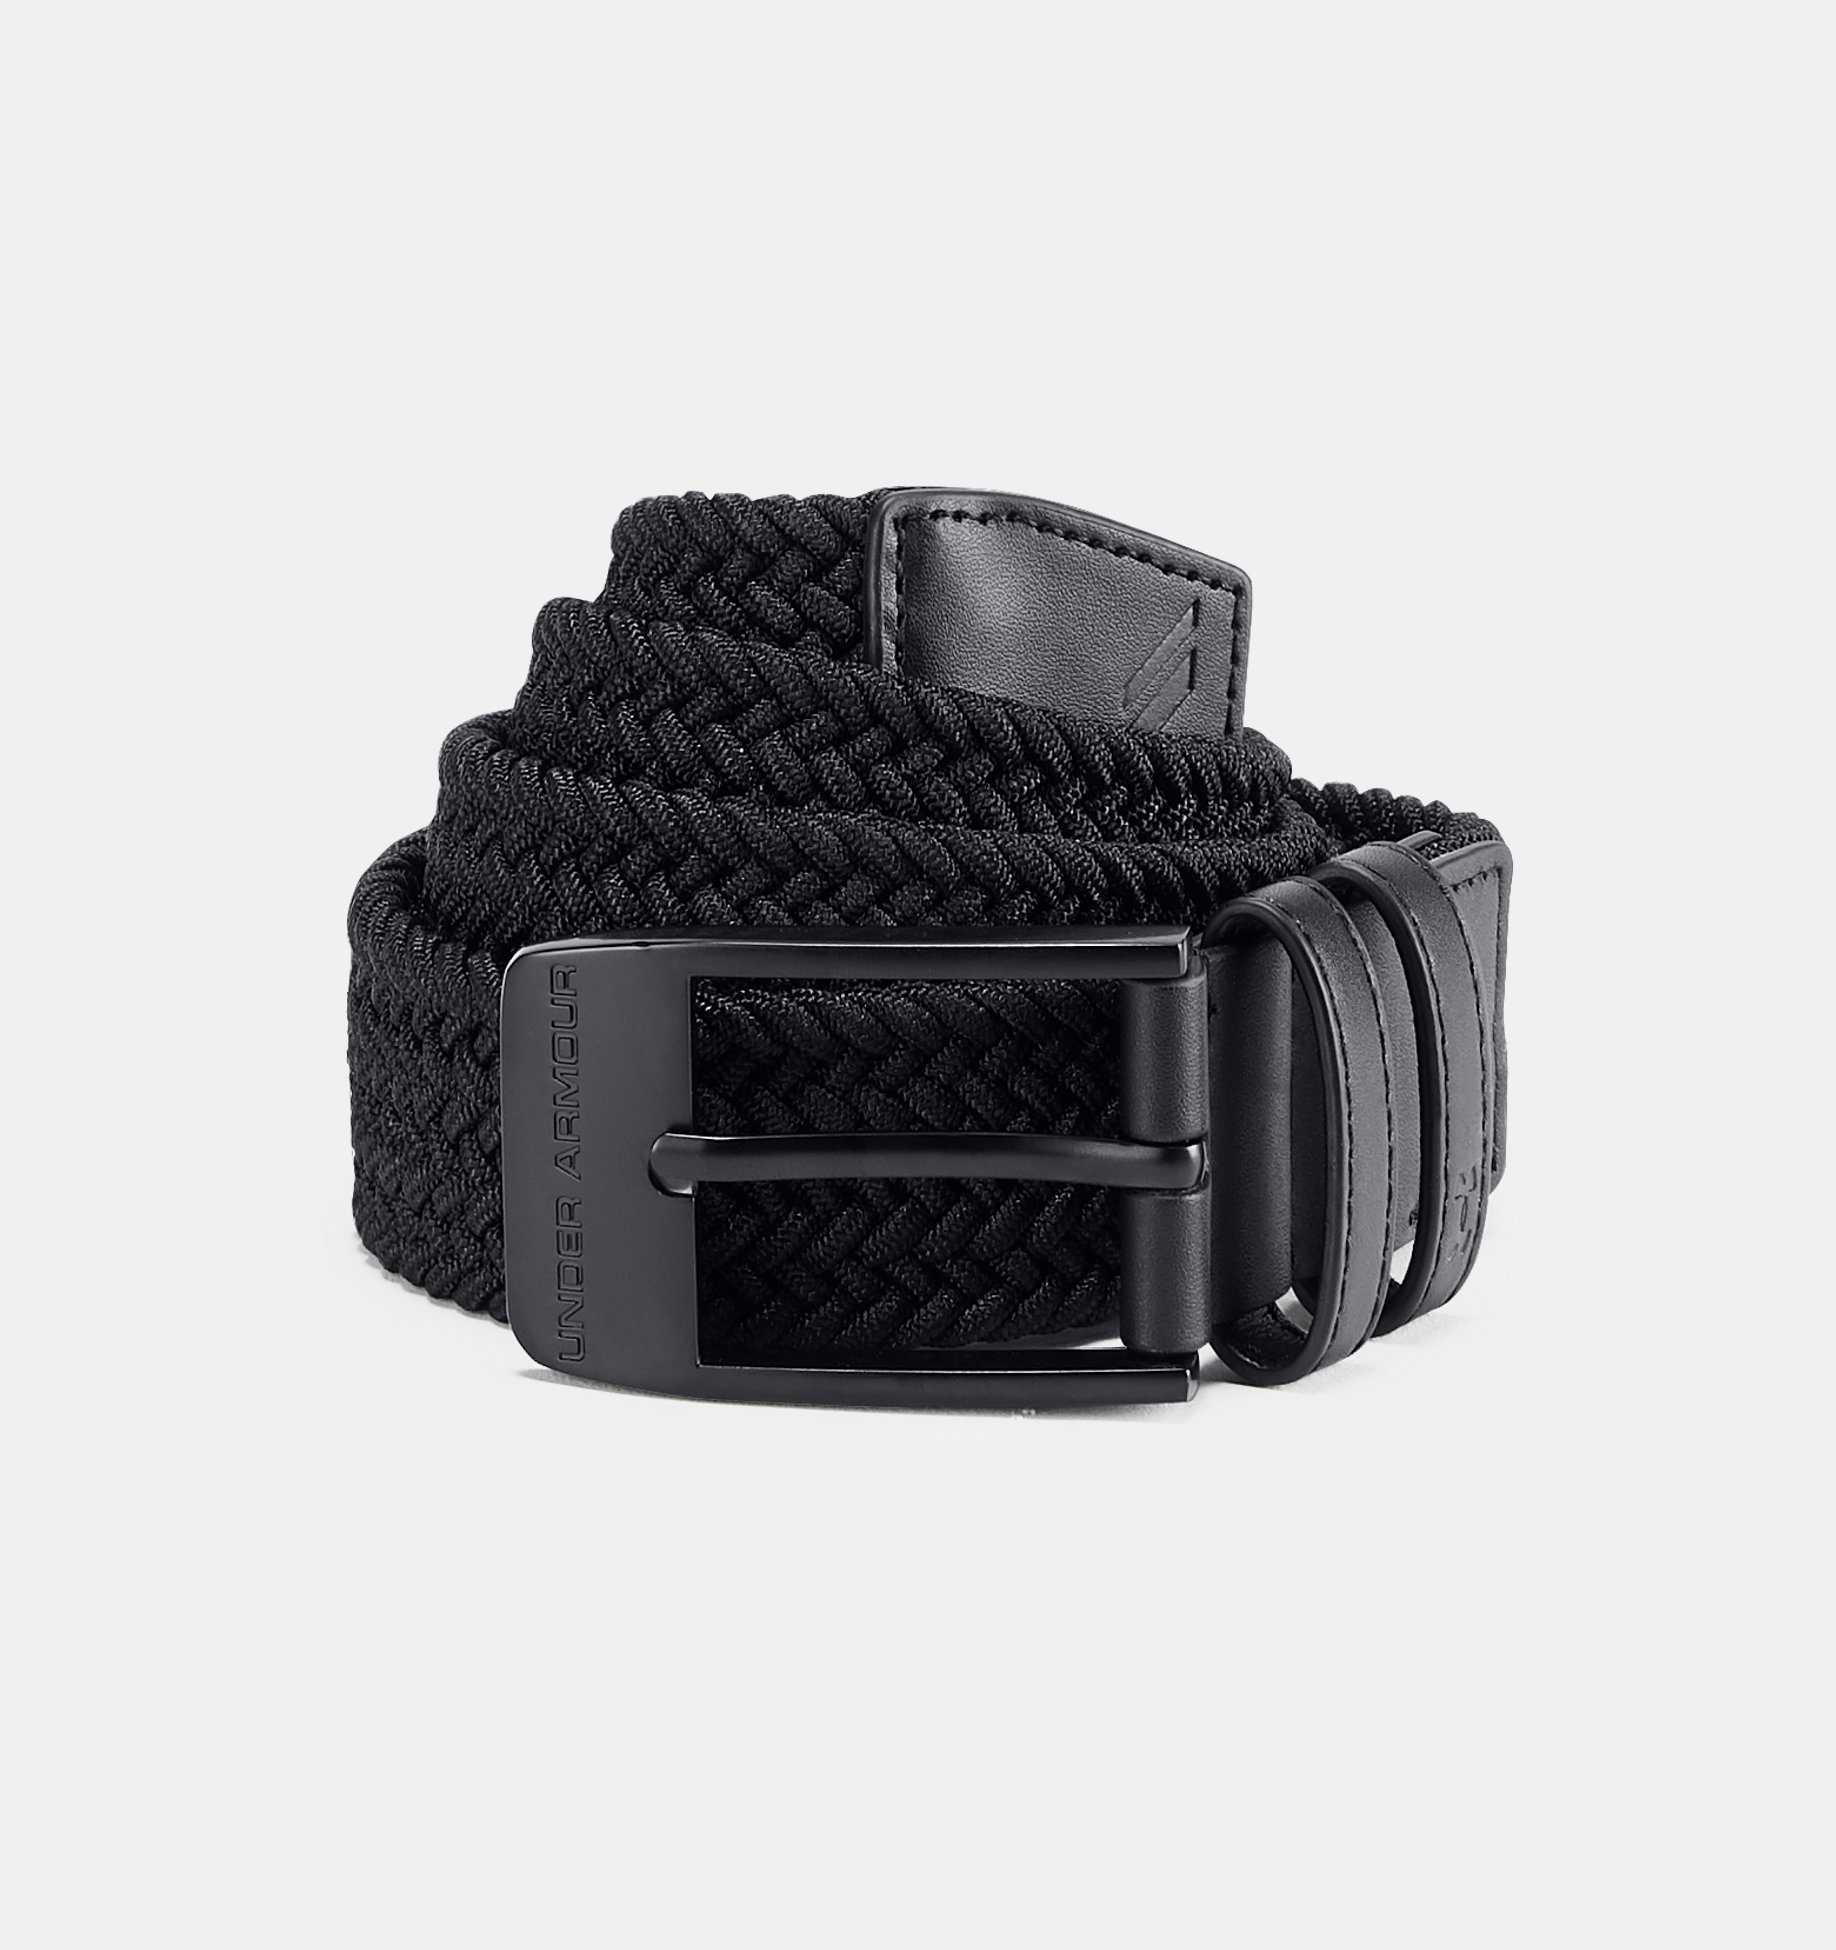 Updating your look is a cinch (literally!) with these 5 braided belts